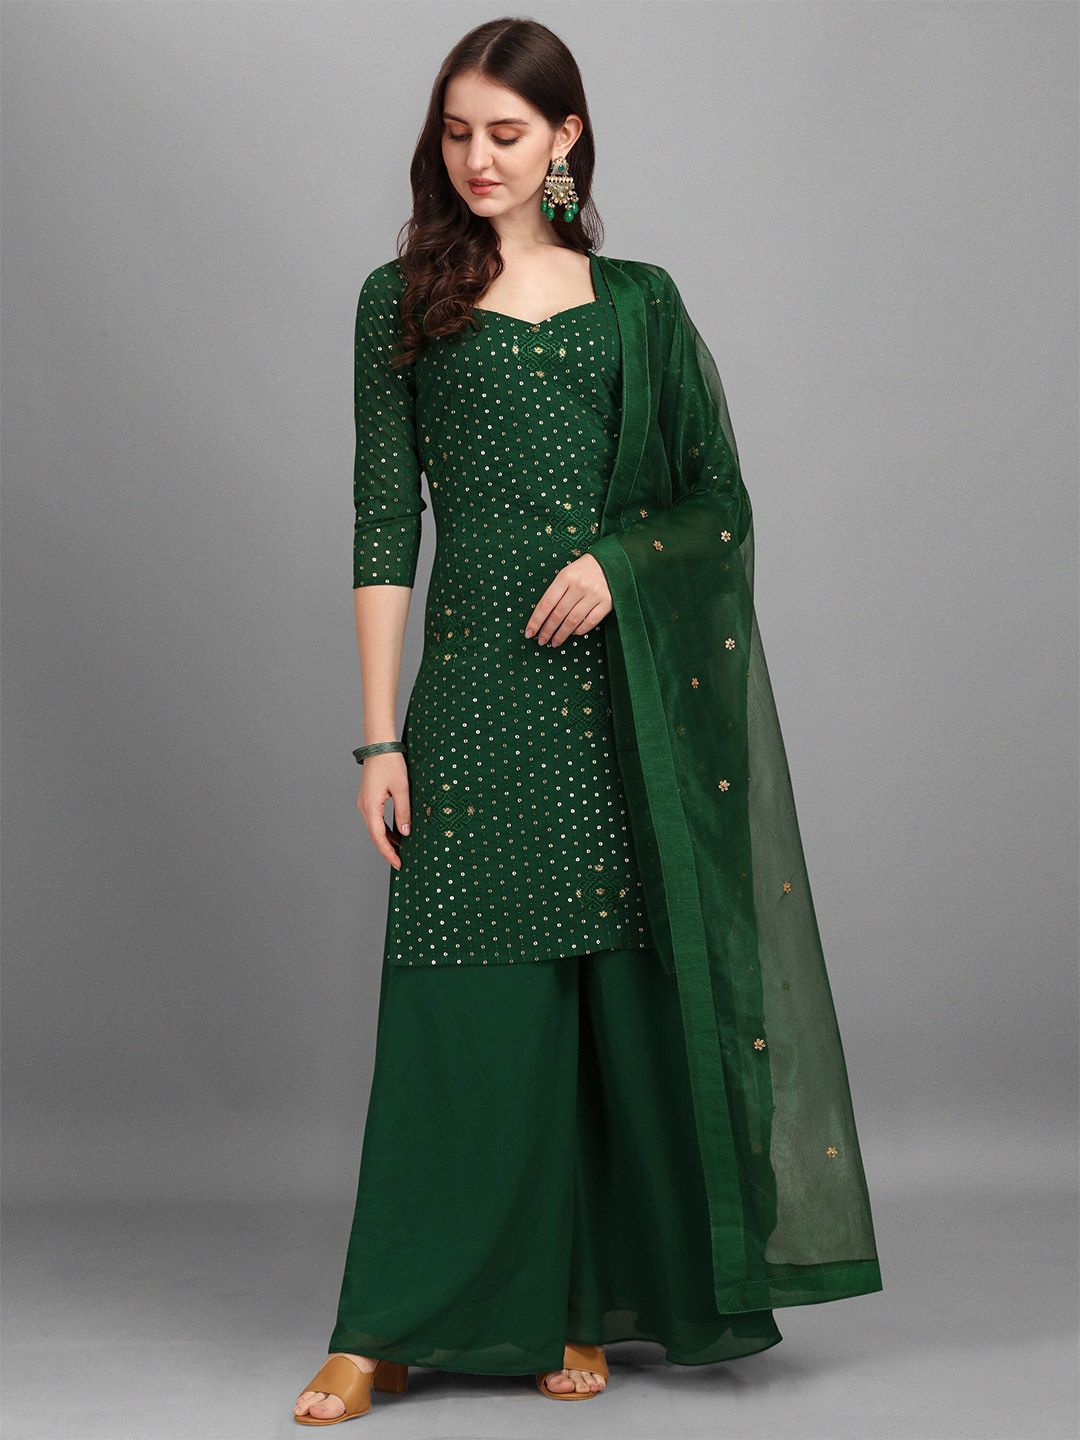 Fashion Basket Green Embroidered Semi-Stitched Dress Material Price in India